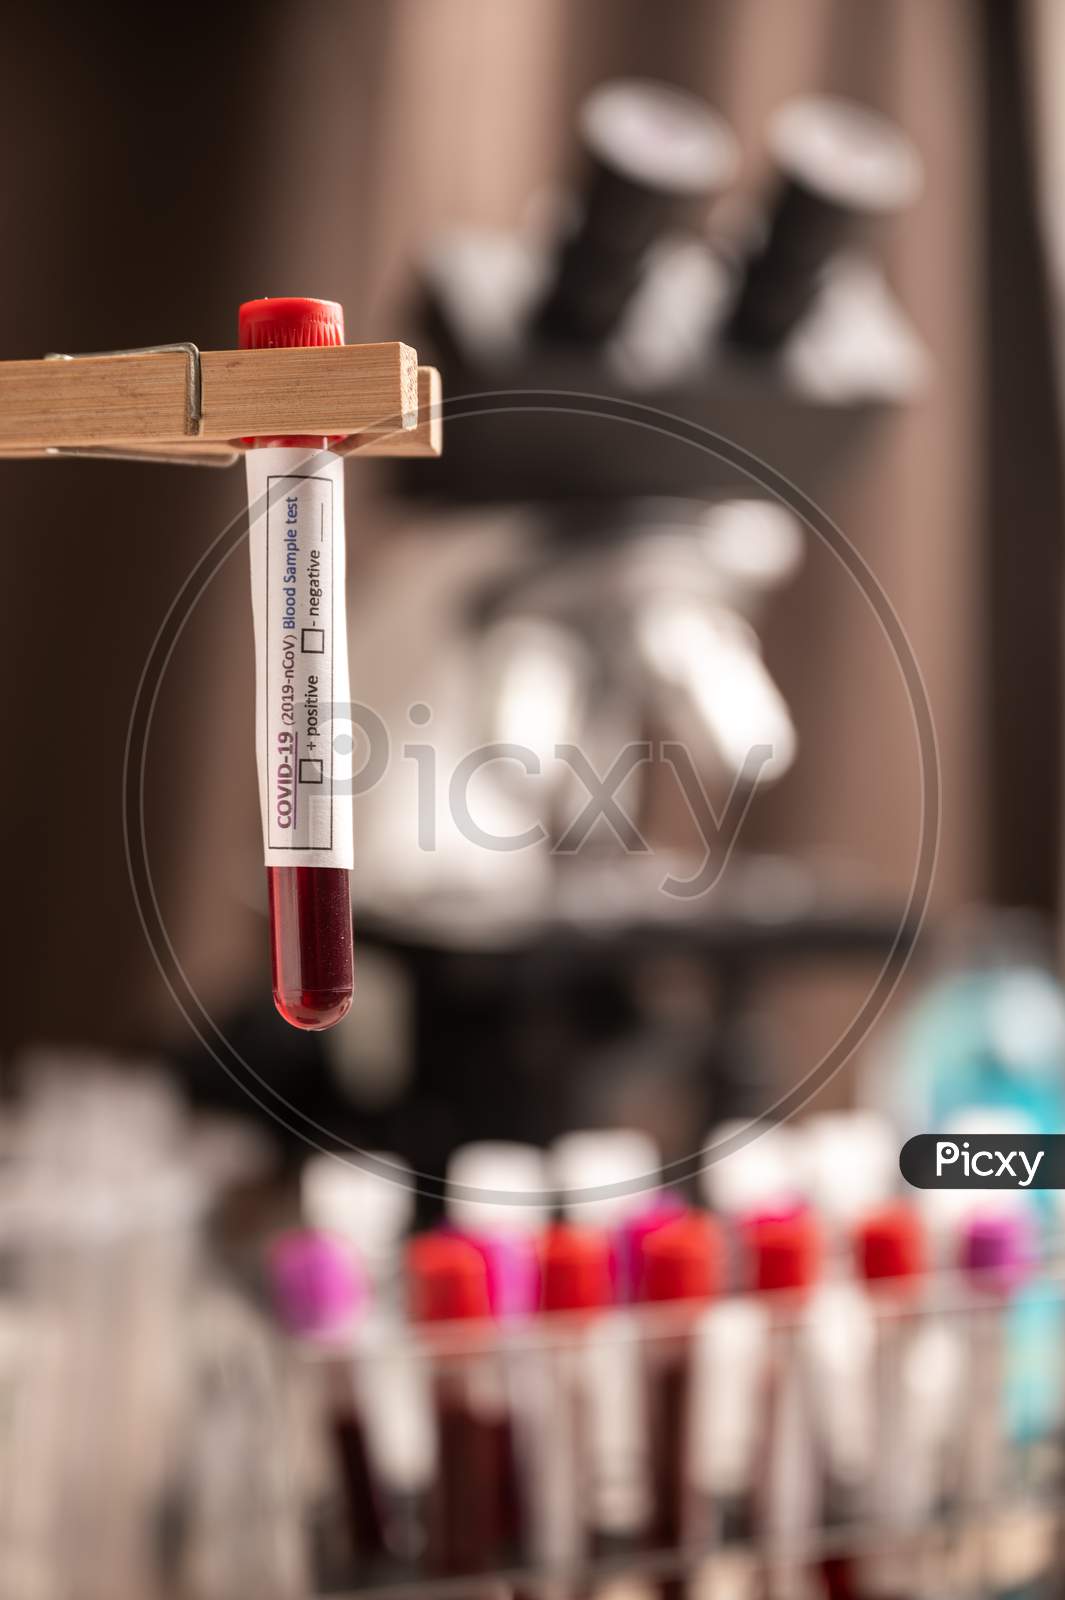 Covid-19 Test And Laboratory Sample Of Blood Testing For Diagnosis New Corona Virus Infection(Novel Corona Virus Disease 2019) From Wuhan, China. Pandemic Infectious Concept